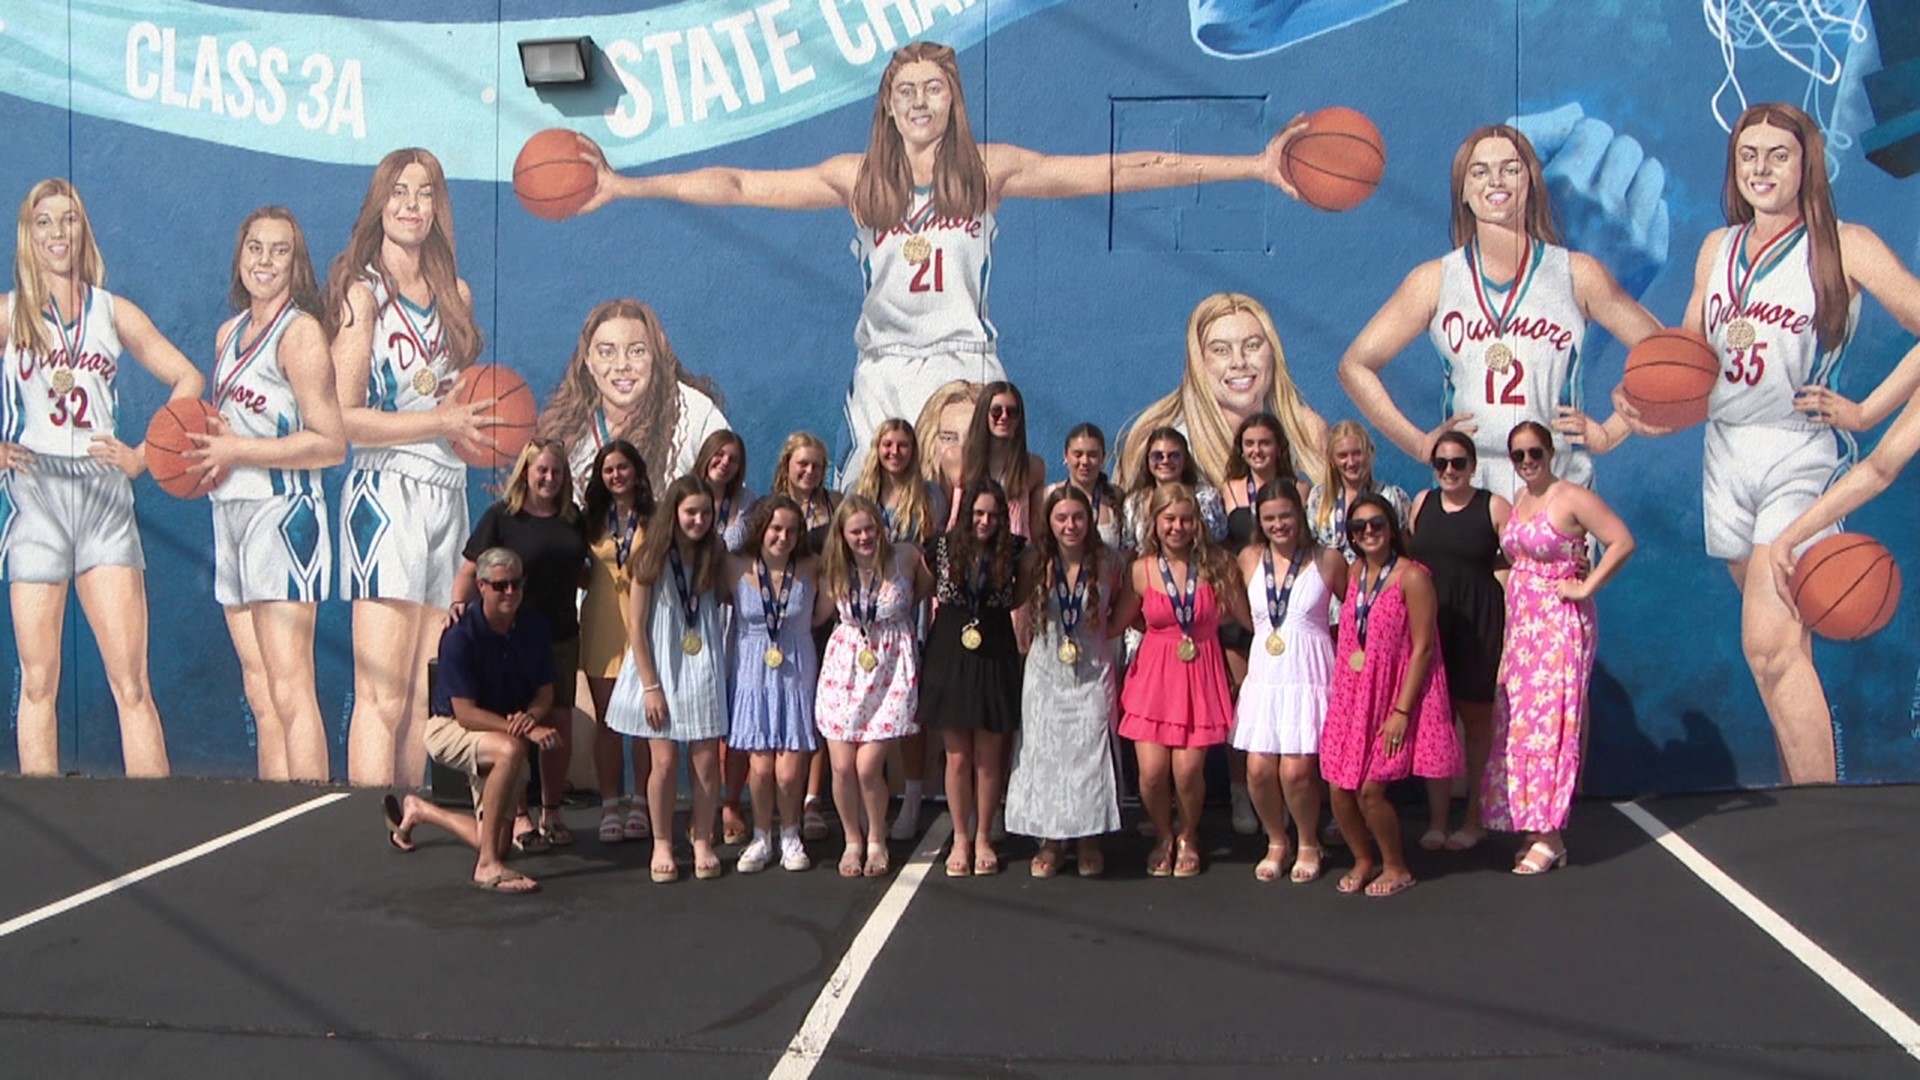 A new mural dedicated to the state championship winners was unveiled Sunday.